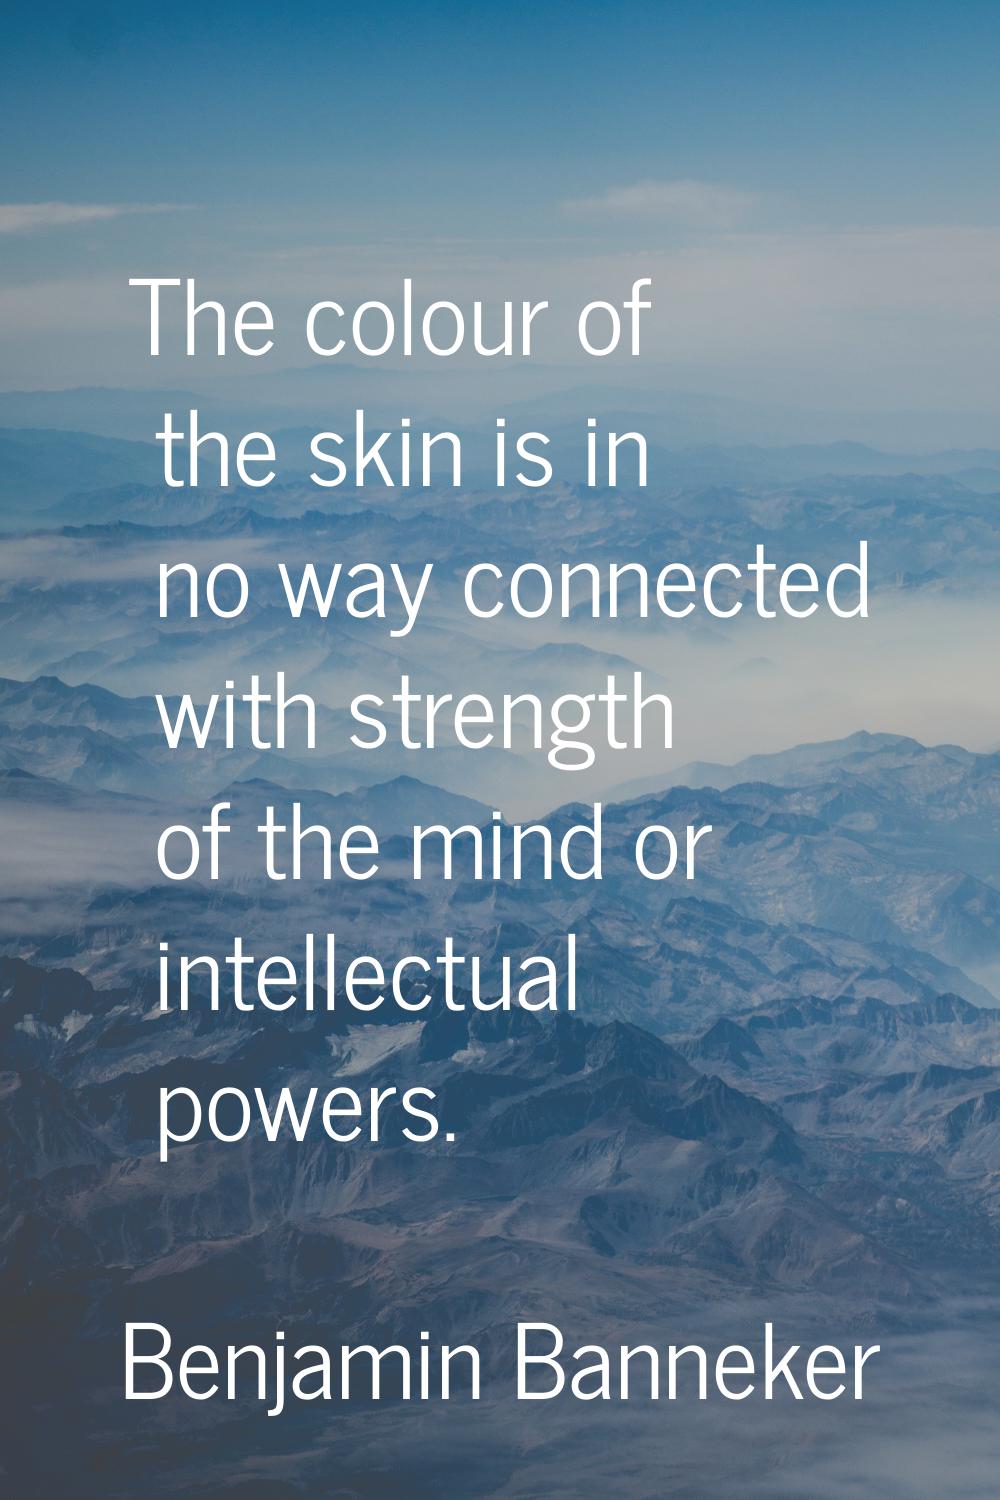 The colour of the skin is in no way connected with strength of the mind or intellectual powers.